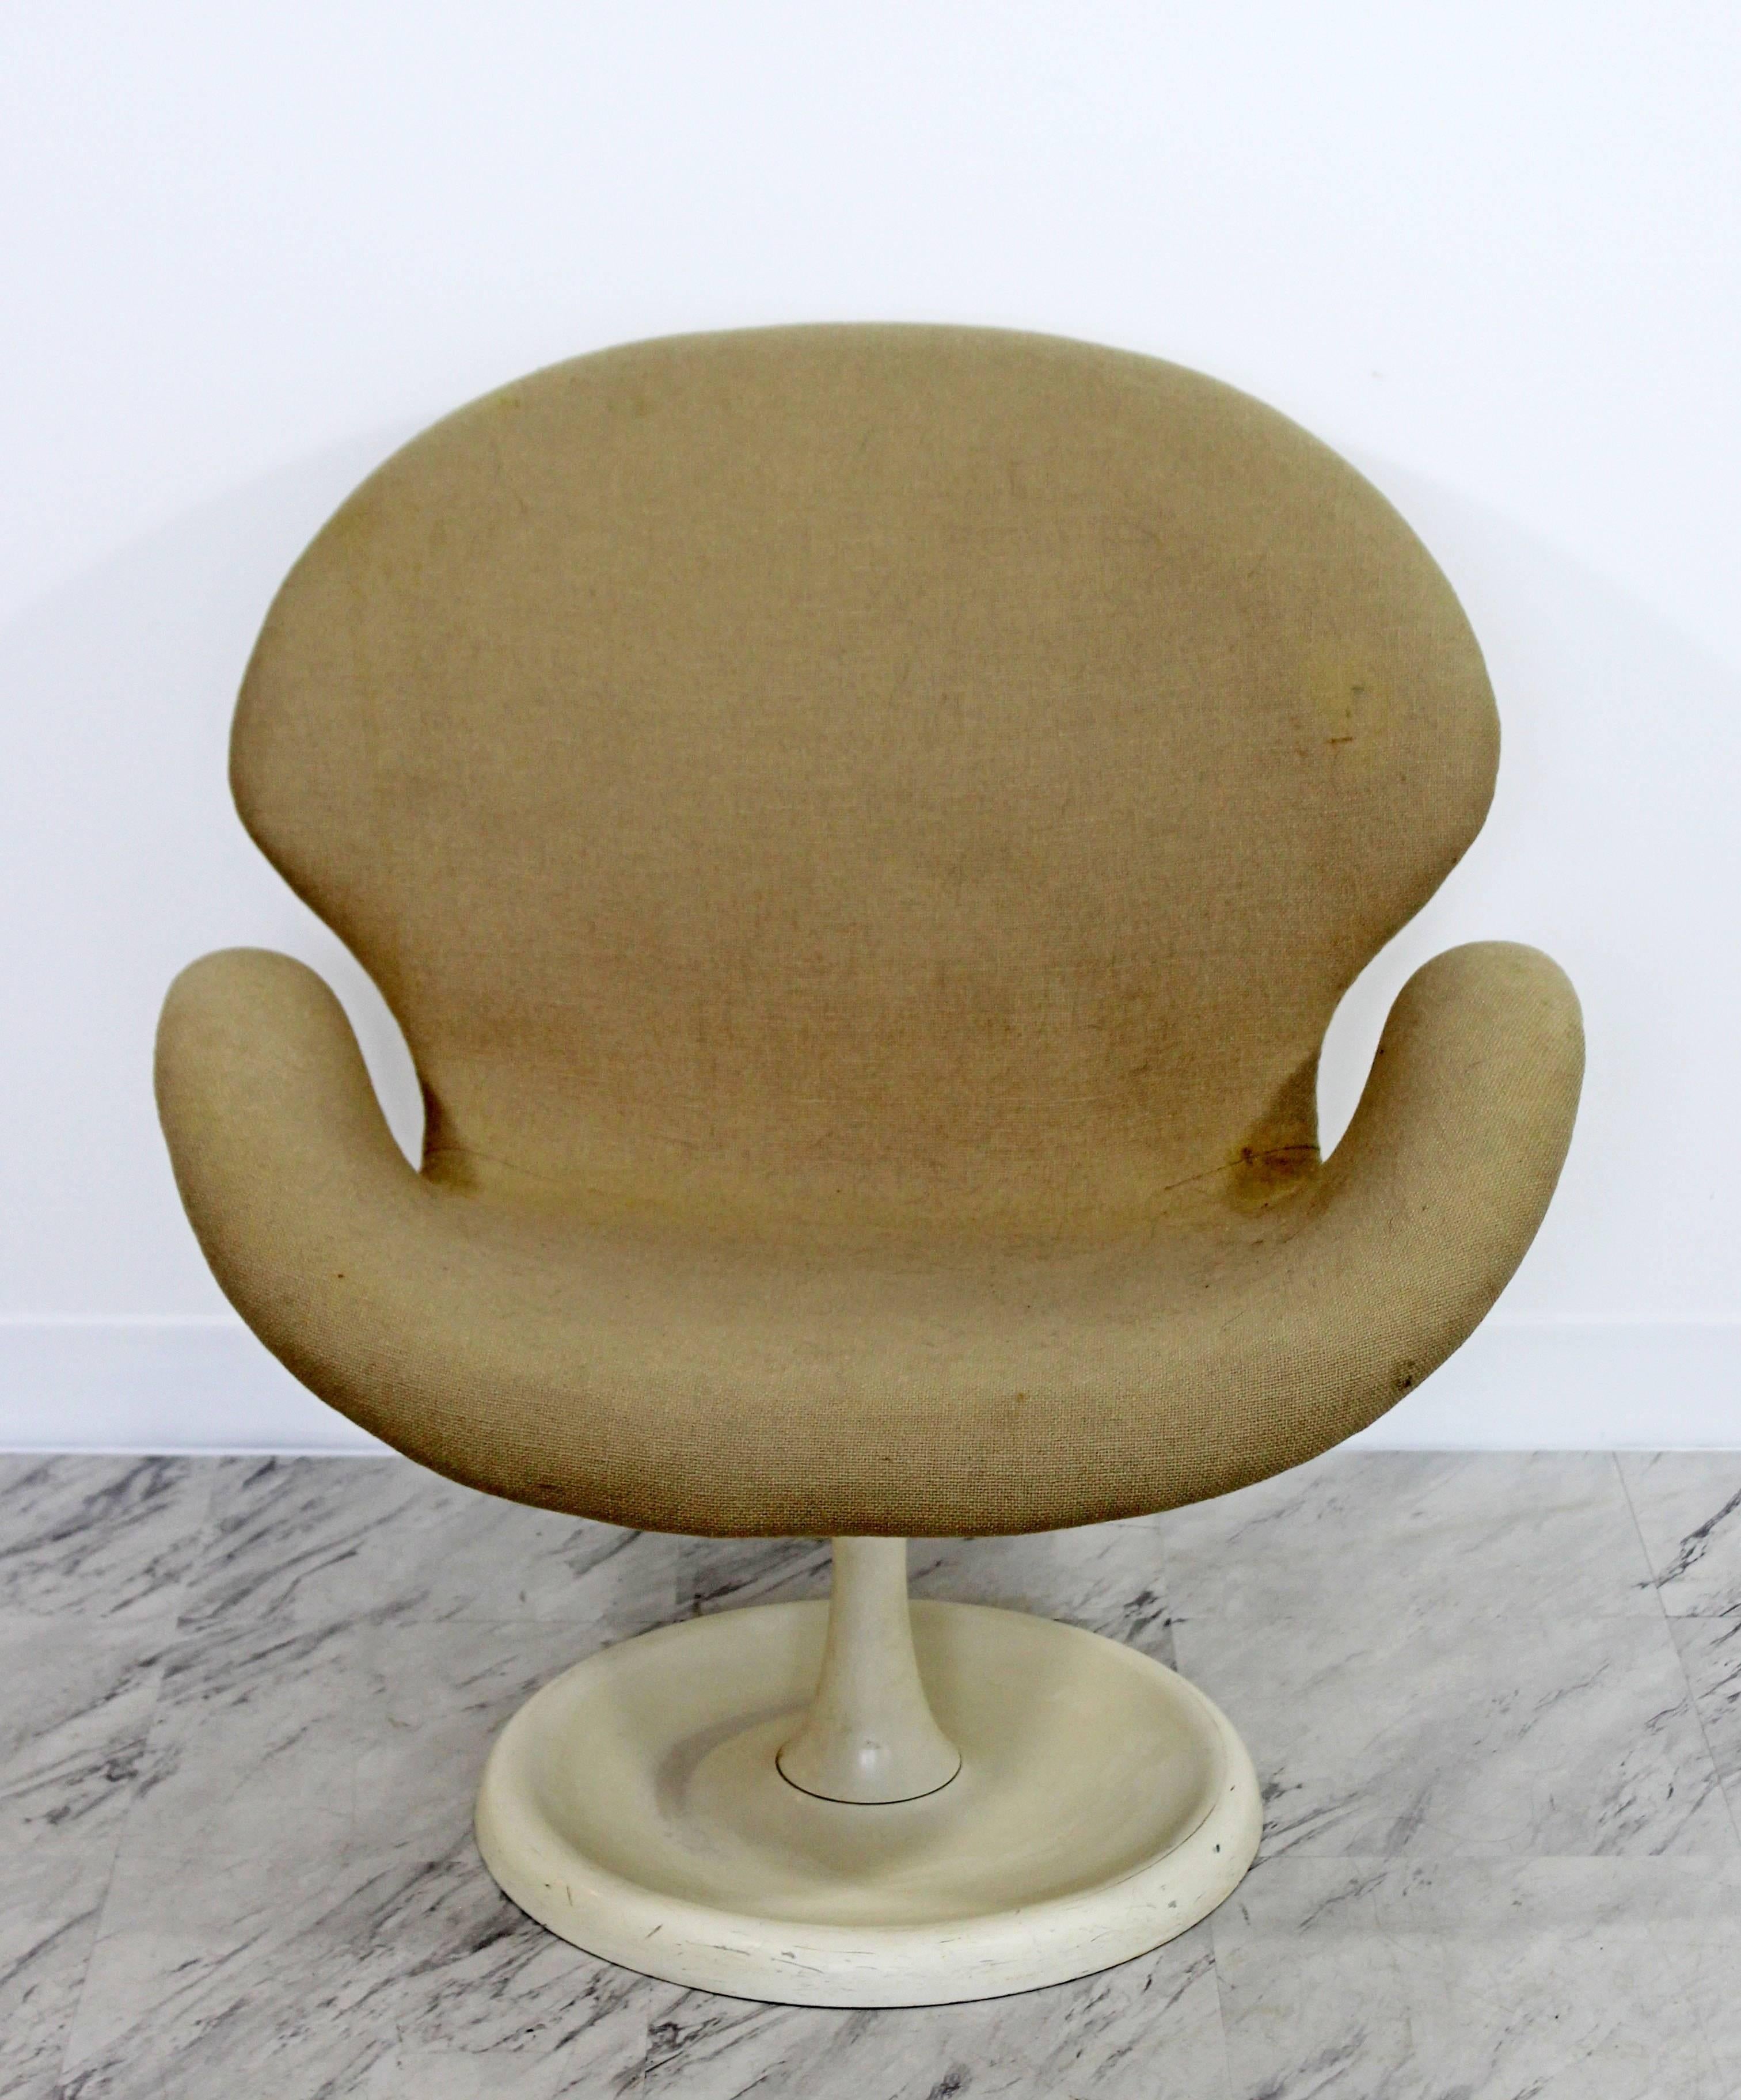 For your consideration is an incredibly rare Danish orchid lounge chair by Aage Egeriis, that swivels on its steel base, circa the 1960s. In good condition, but needs re-upholstery and re-foaming. The dimensions are 29.5